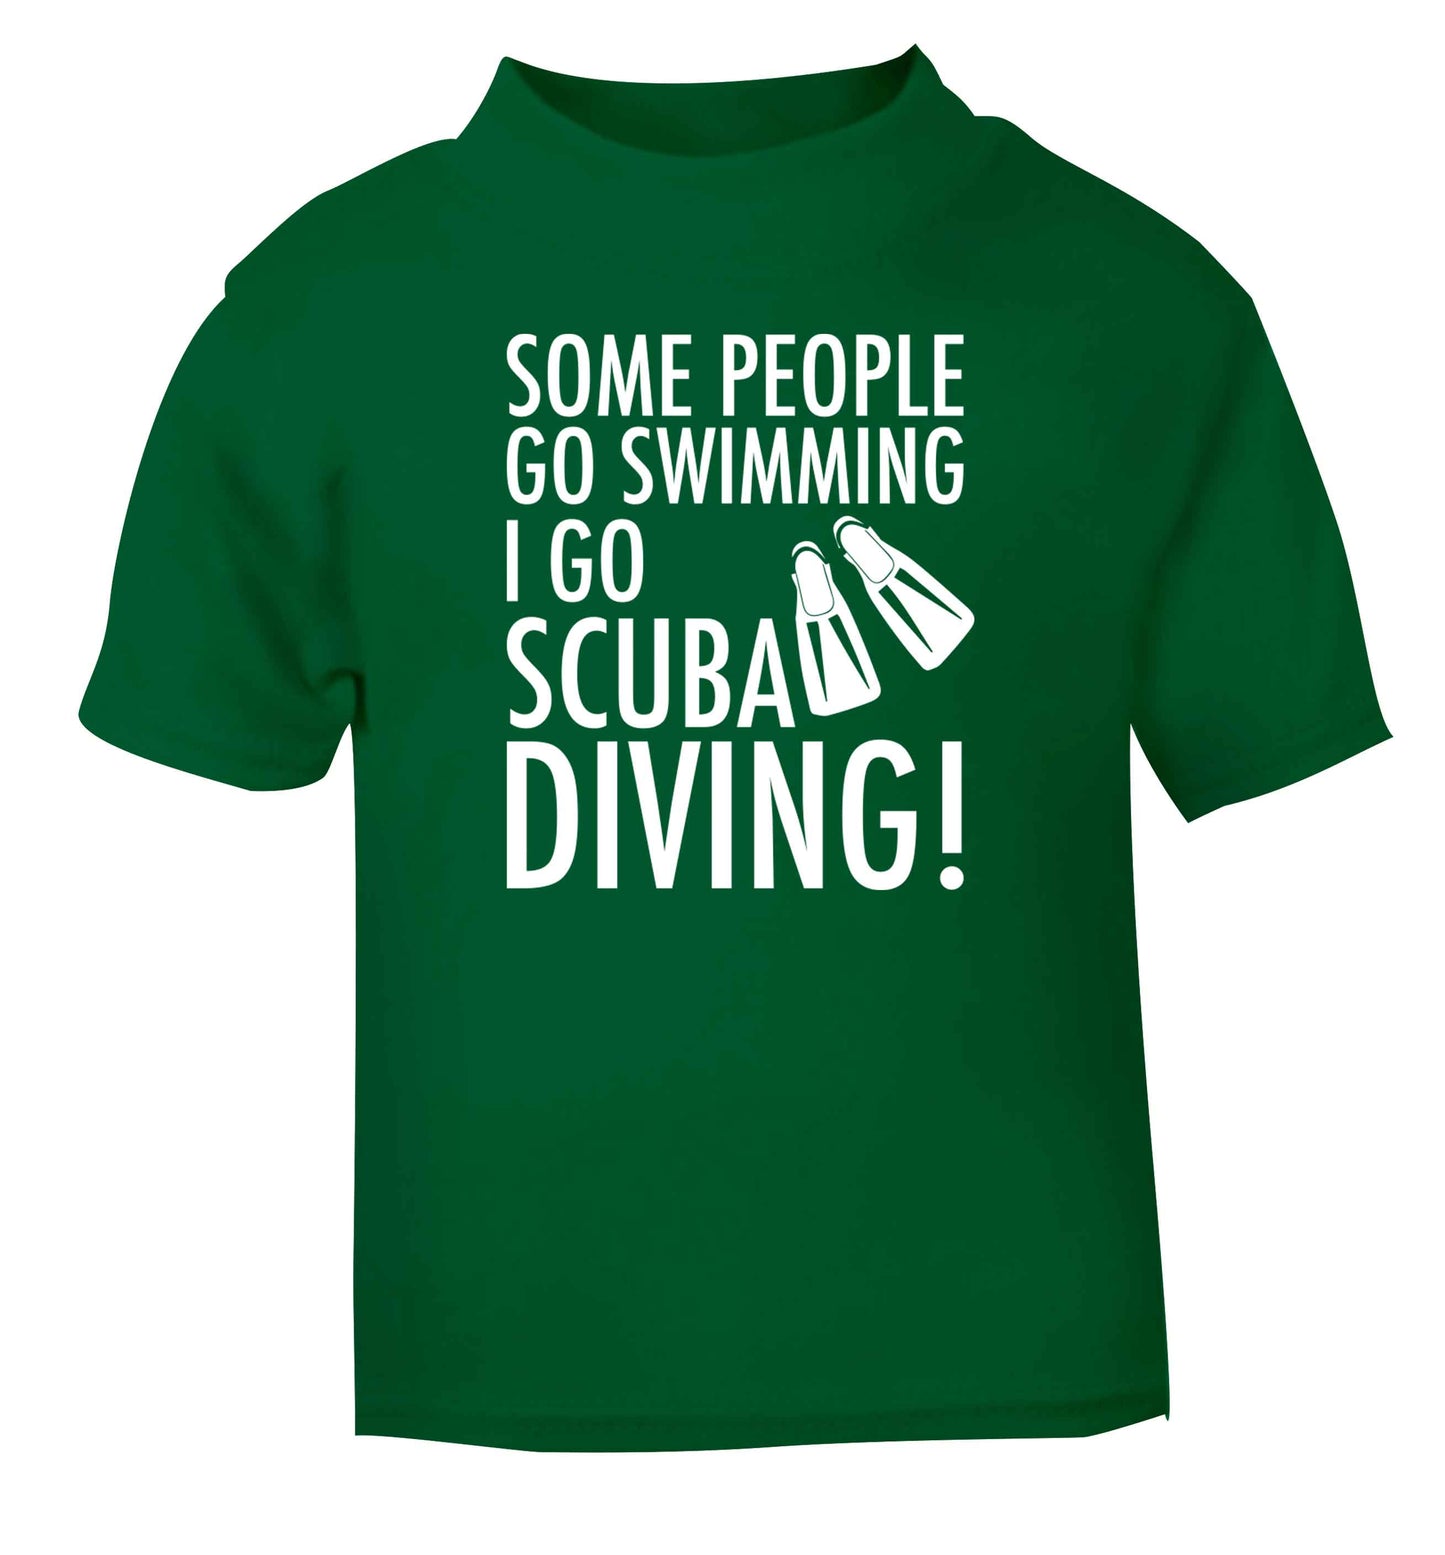 Some people go swimming I go scuba diving! green Baby Toddler Tshirt 2 Years